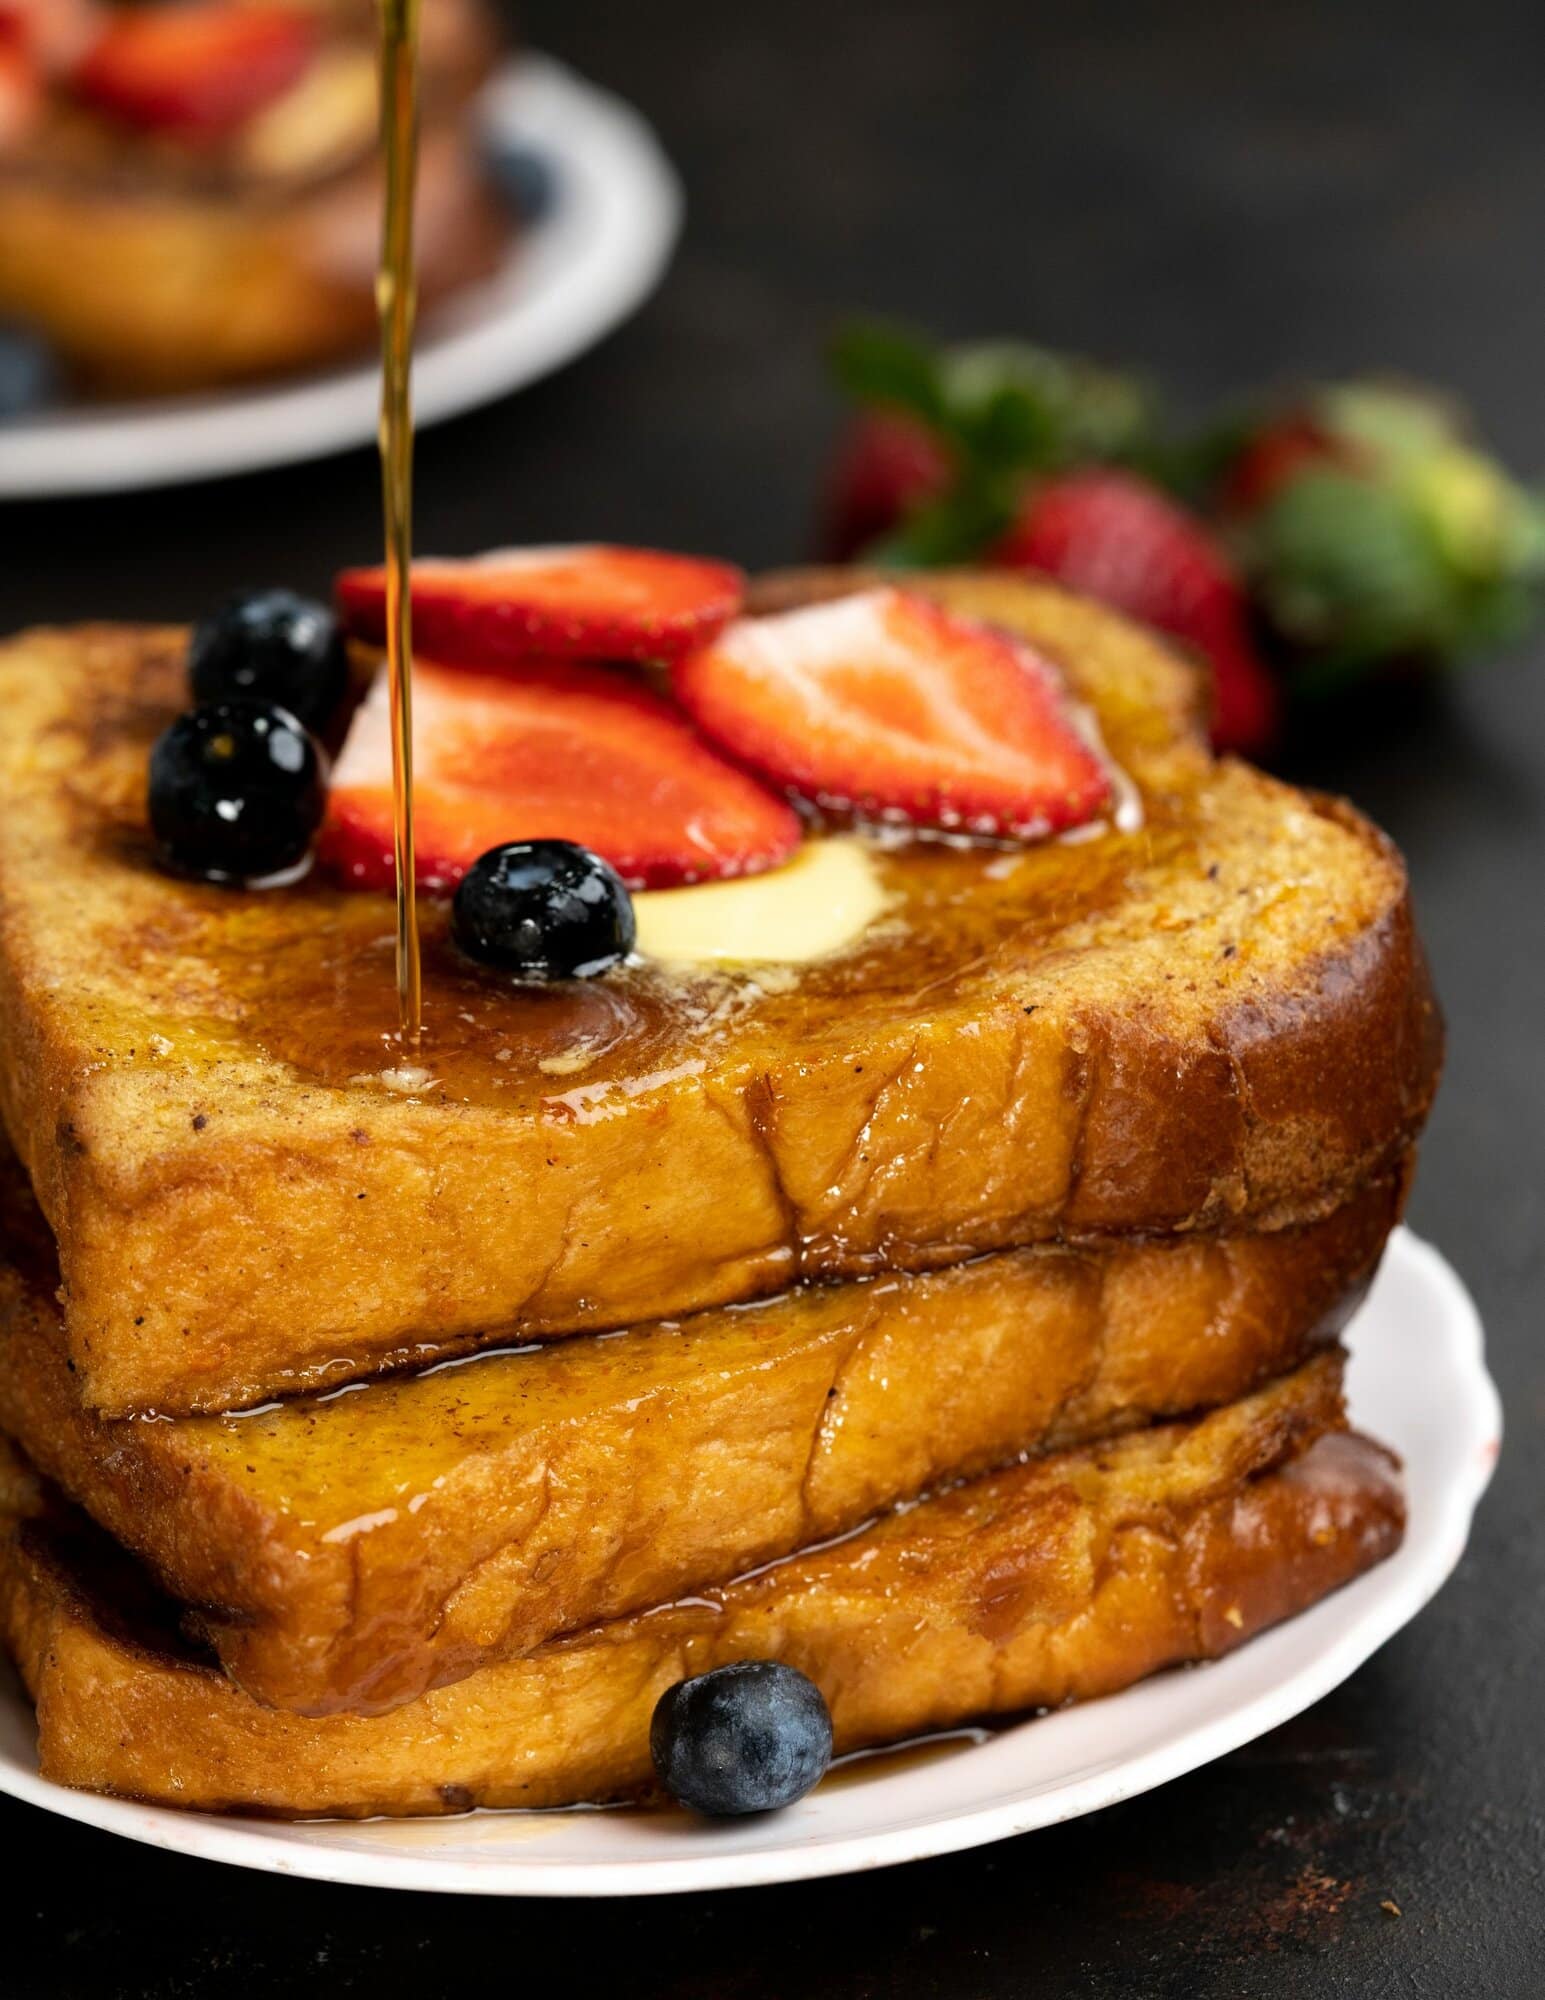 Maple syrup being drizzled over a stack of french toasts with toppings of berries and butter.